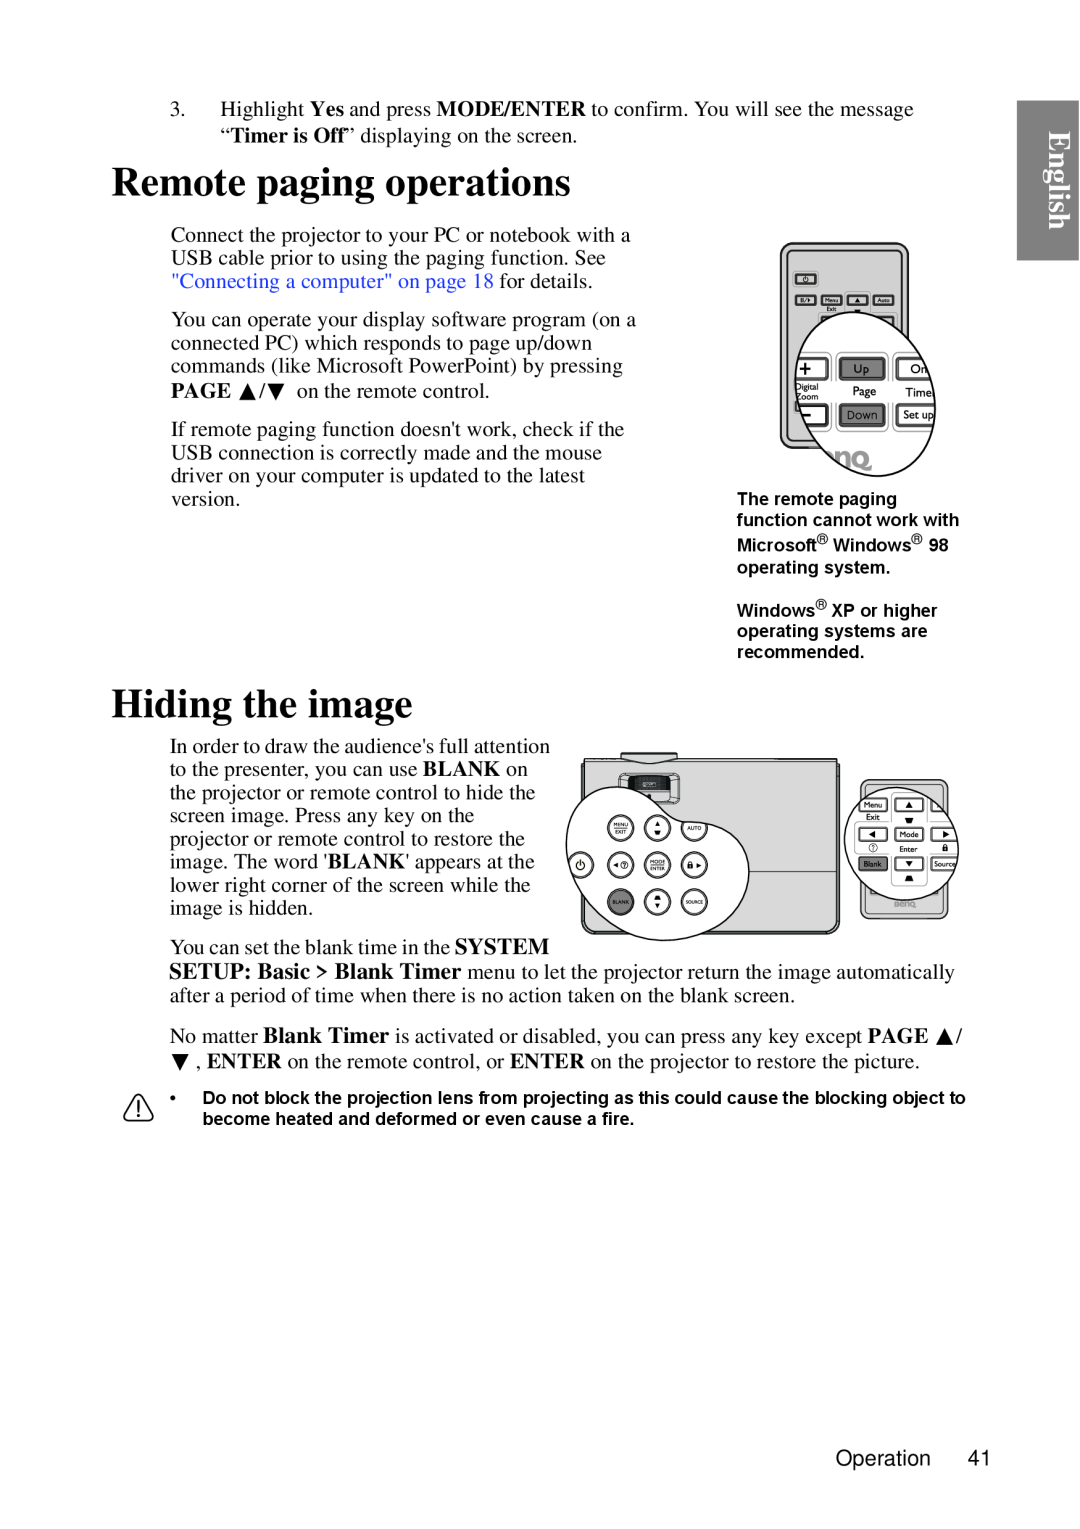 BenQ MP670 user manual Remote paging operations, Hiding the image, English, Page 